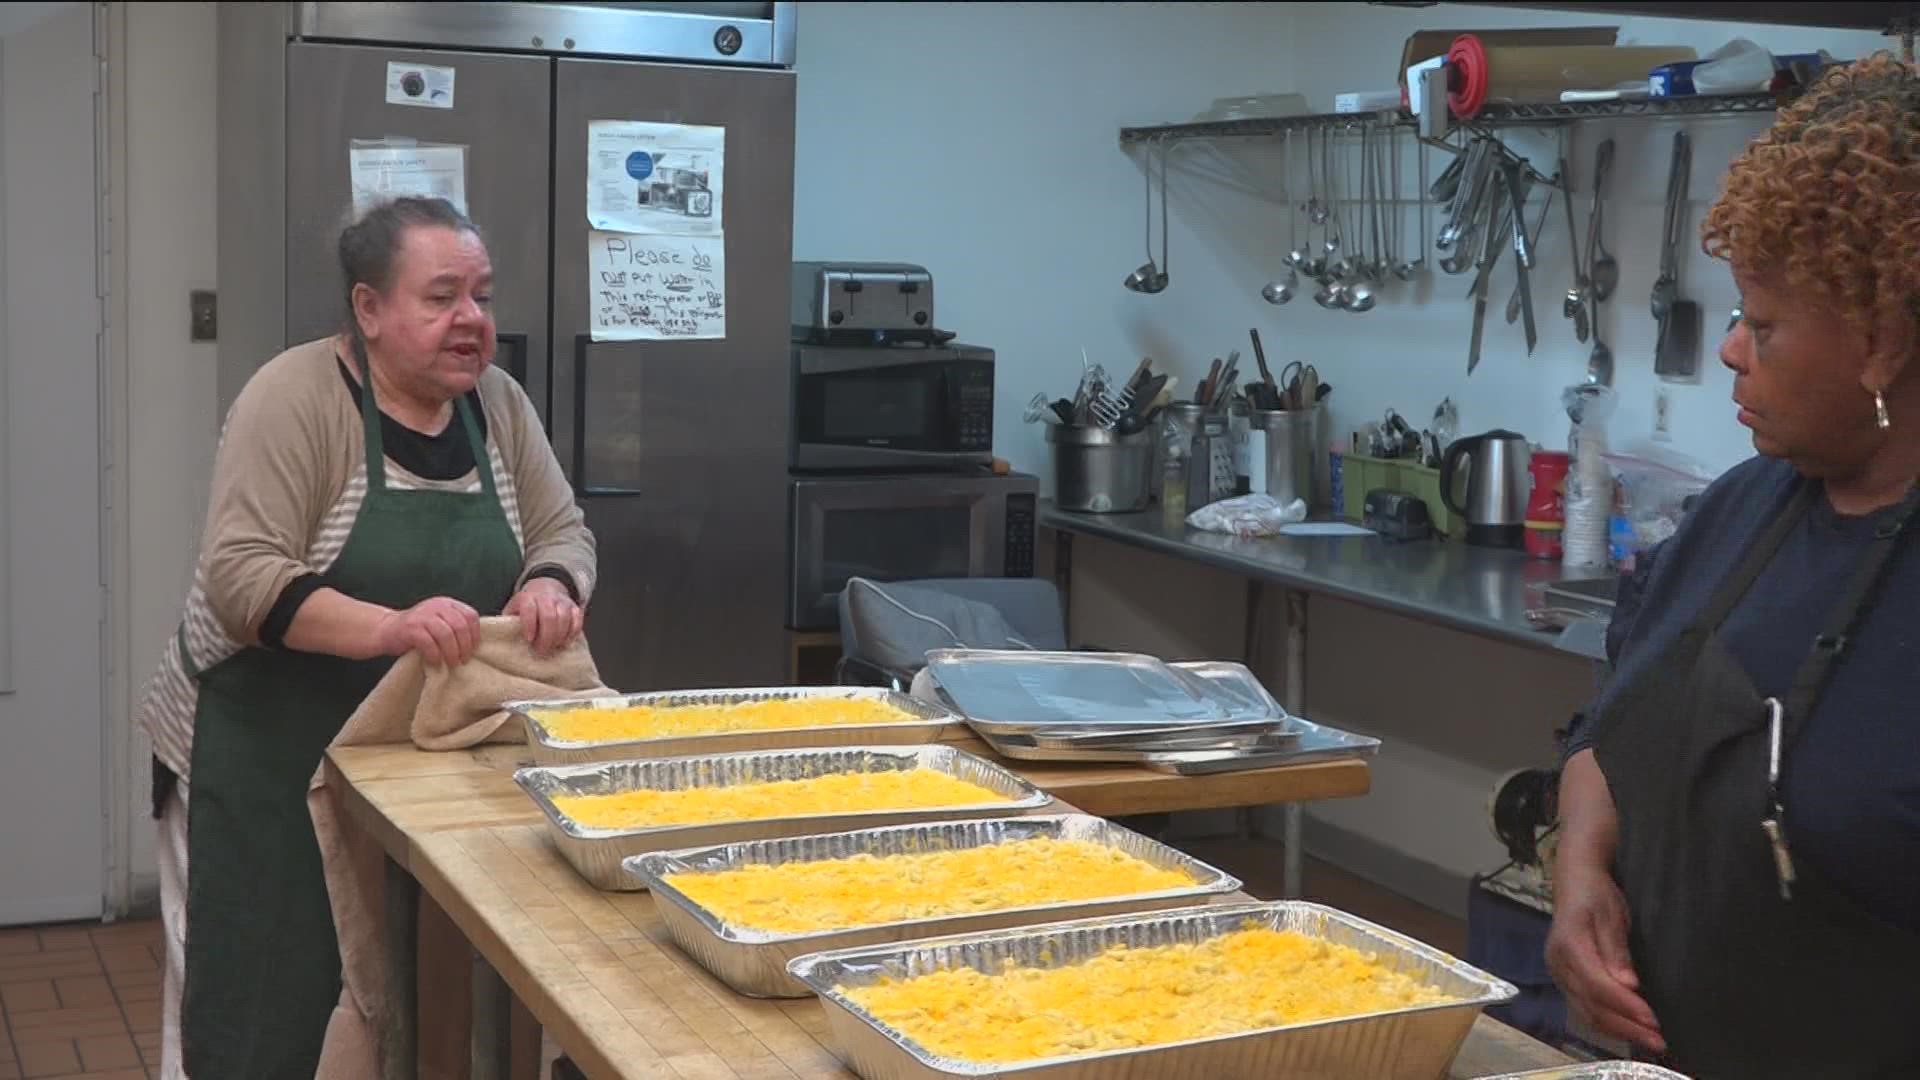 On Sunday, WTOL 11 spoke to one volunteer at MLK's Kitchen for the Poor as they prepared hundreds of meals before MLK Day.